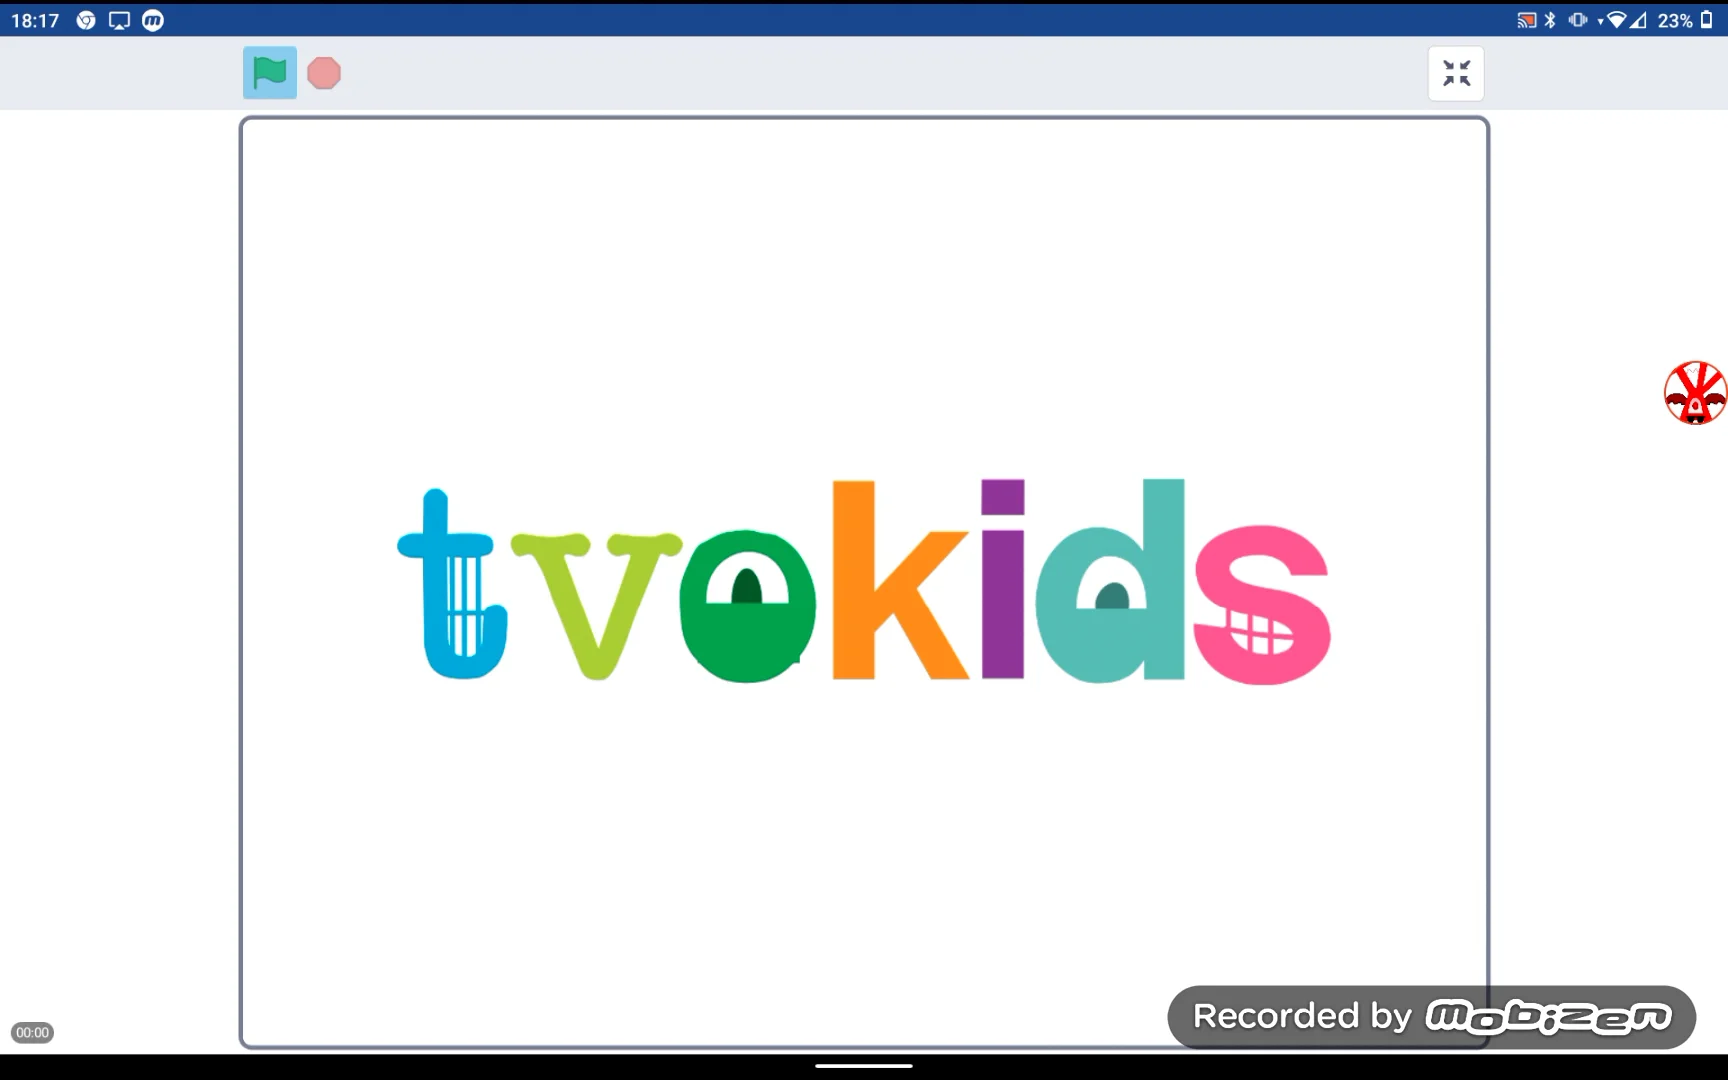 Aiden's tvokids logo bloopers 2 Take 12: K I D AND S Uppercase on